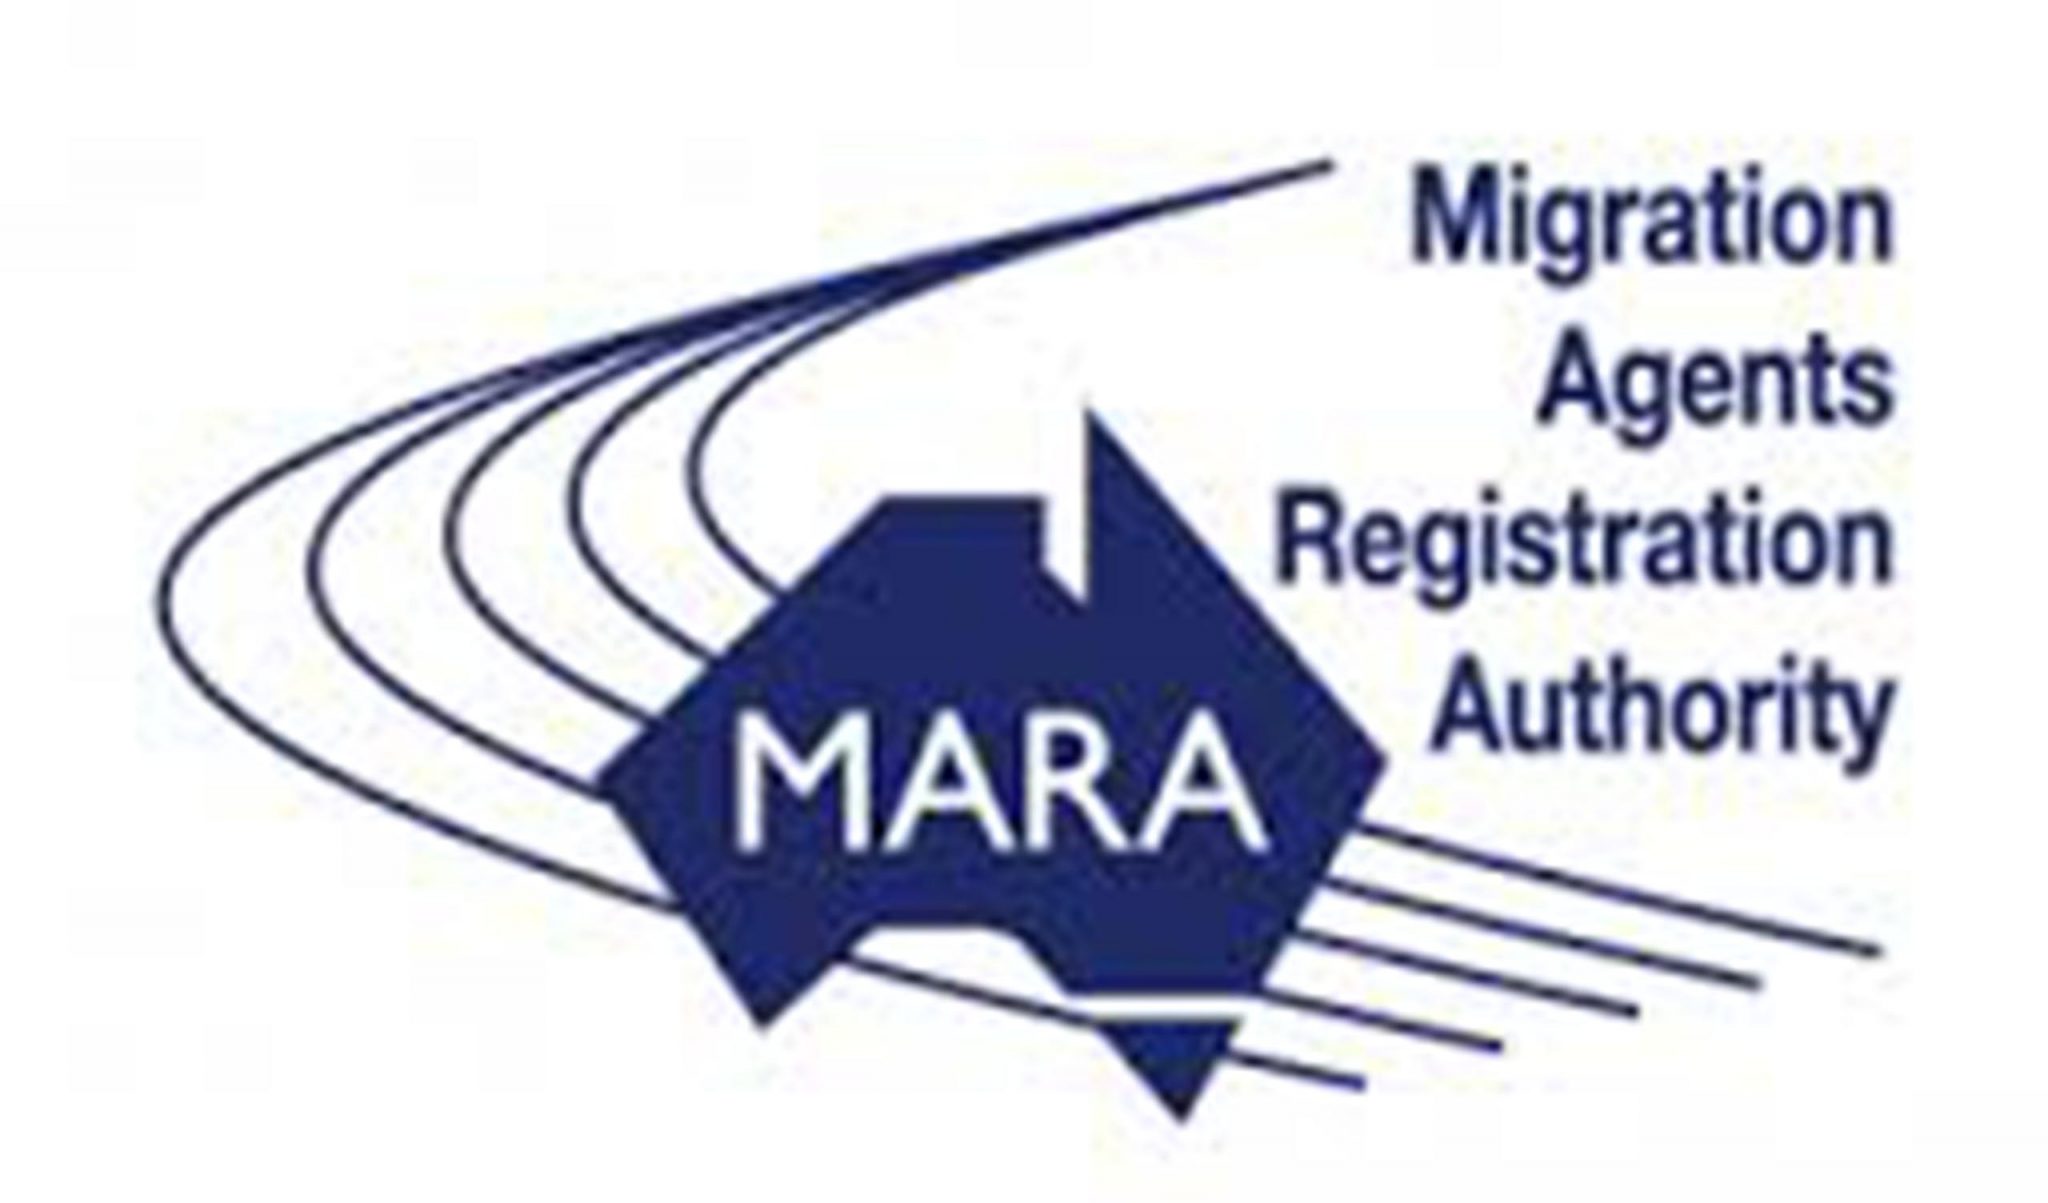 Poor Conduct of the Migration Agents